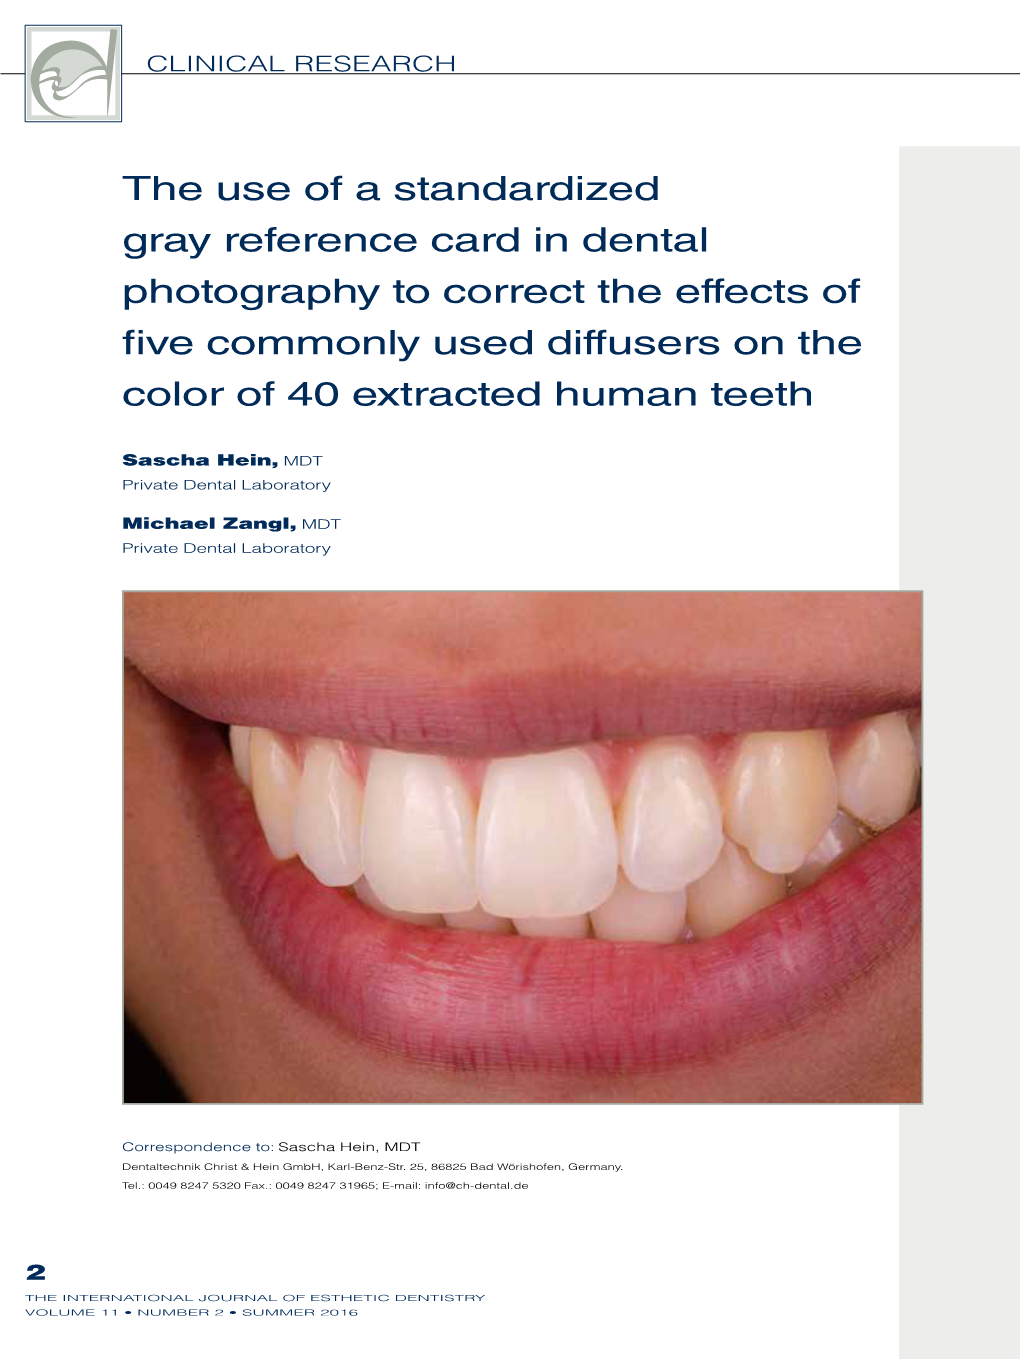 The Use of a Standardized Gray Reference Card in Dental Photography to Correct the Effects of Five Commonly Used Diffusers on the Color of 40 Extracted Human Teeth